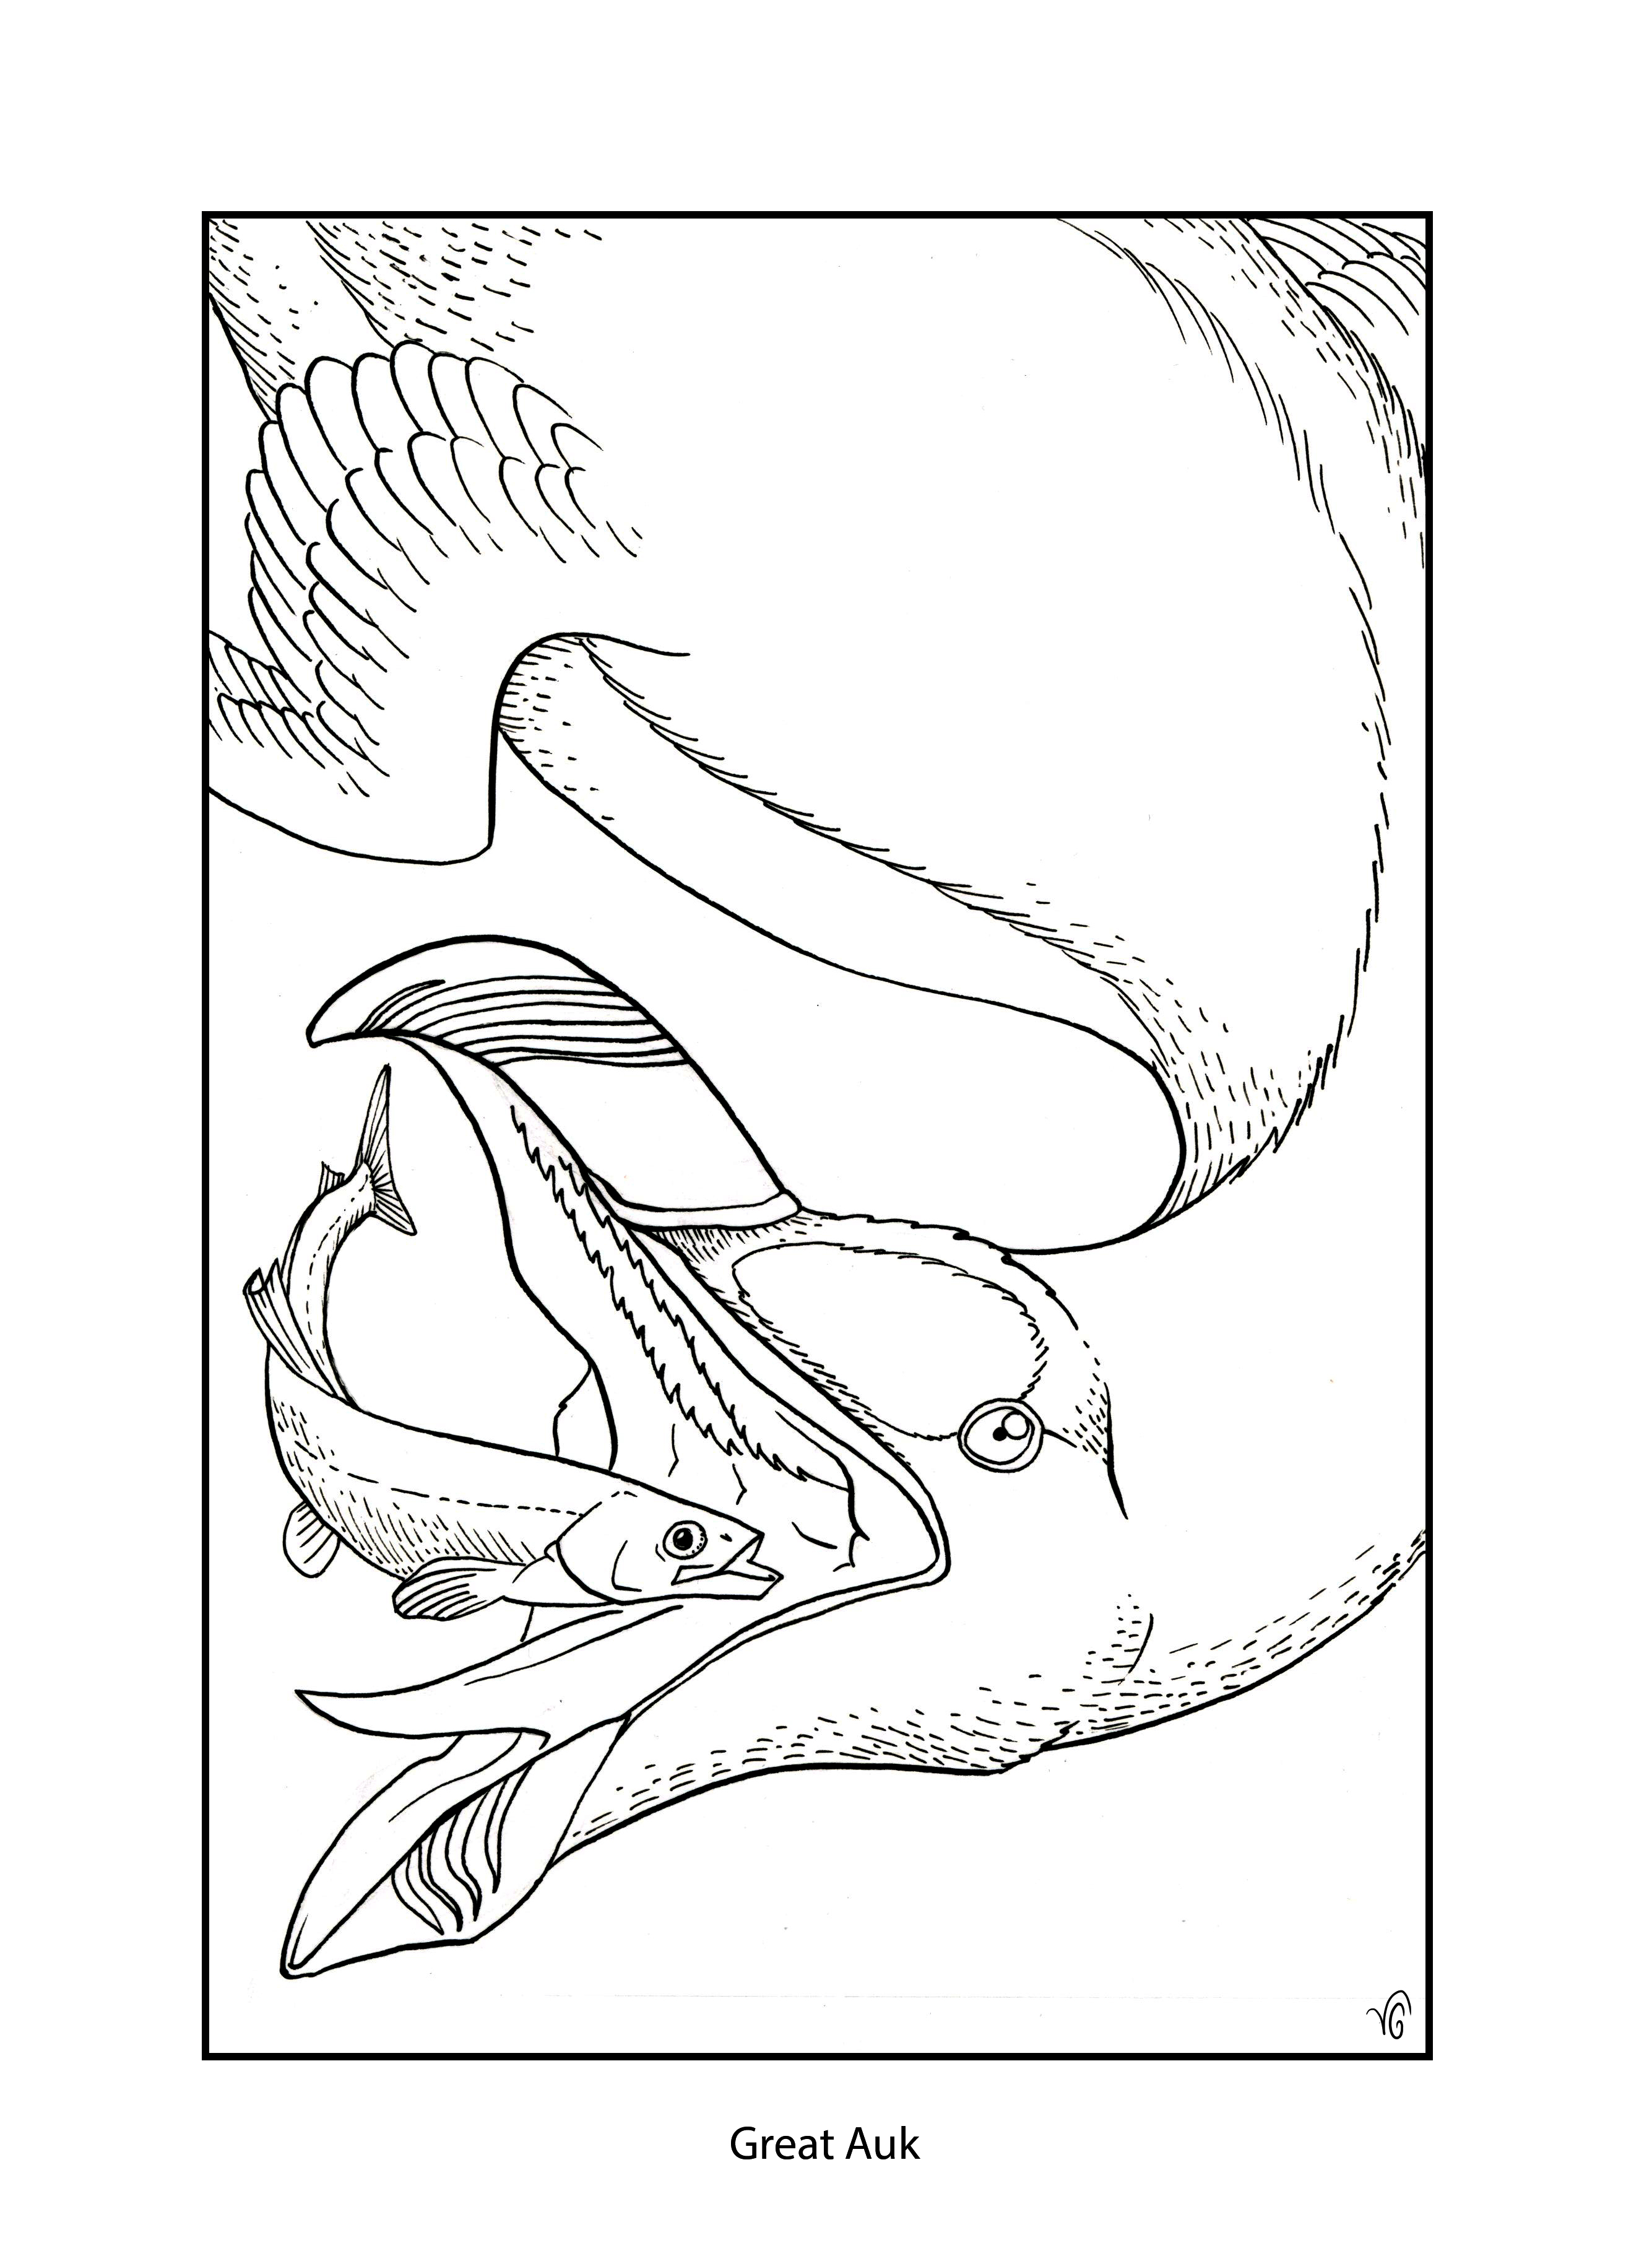 The Very Clumsy Click Beetle Coloring Pages Blast From The Past K 12 Education K 12 Education